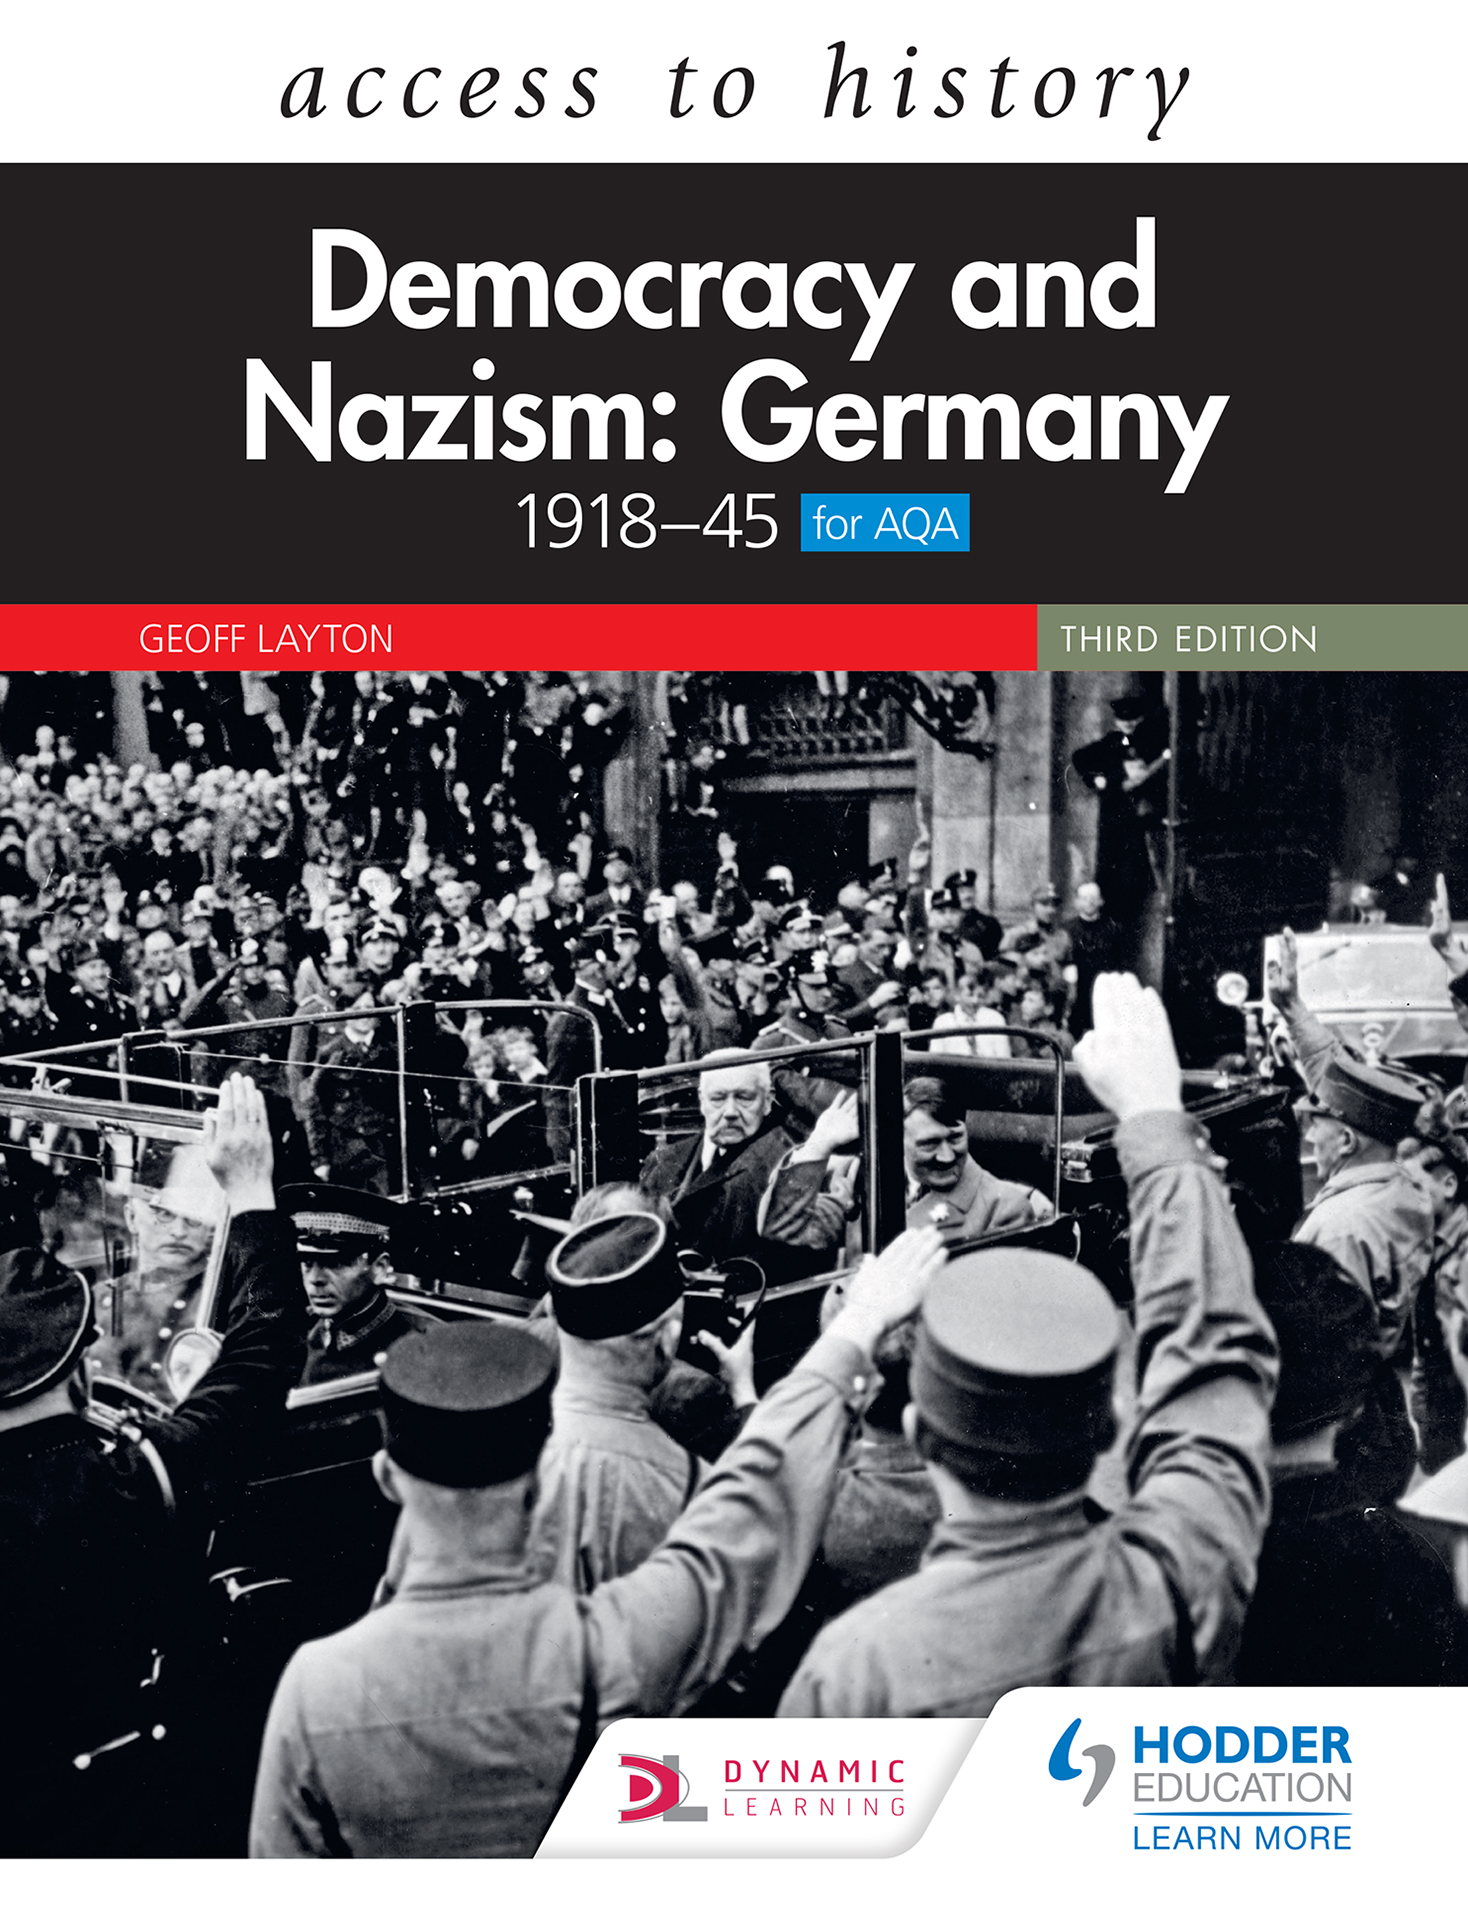 Access to History: Democracy and Nazism: Germany 1918-45 Third E